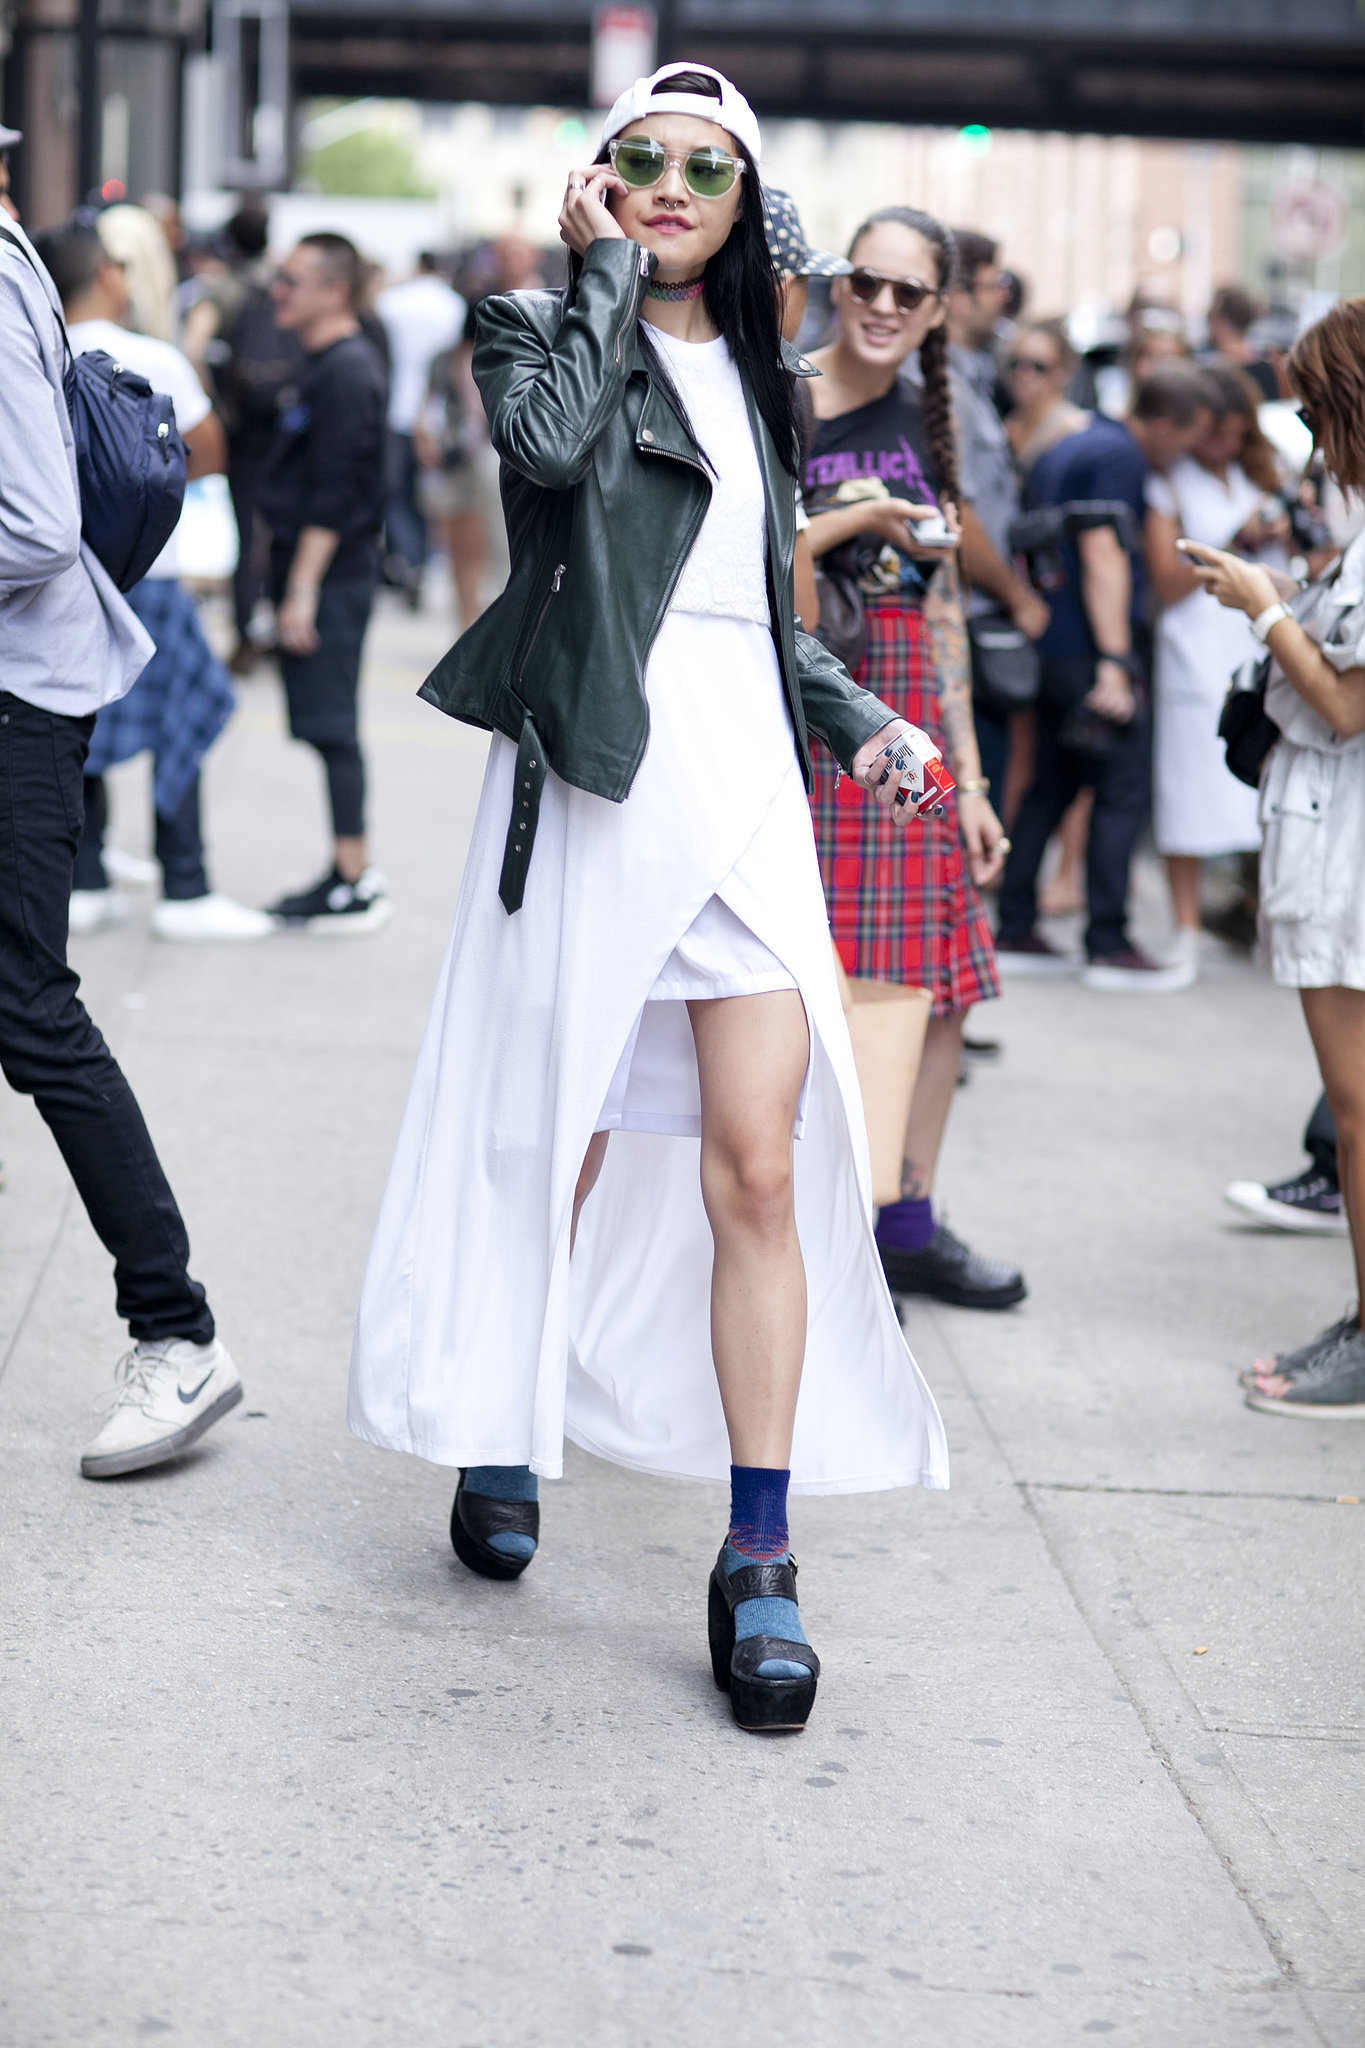 Platforms and socks lend a little quirk to crisp black-and-white look. 
